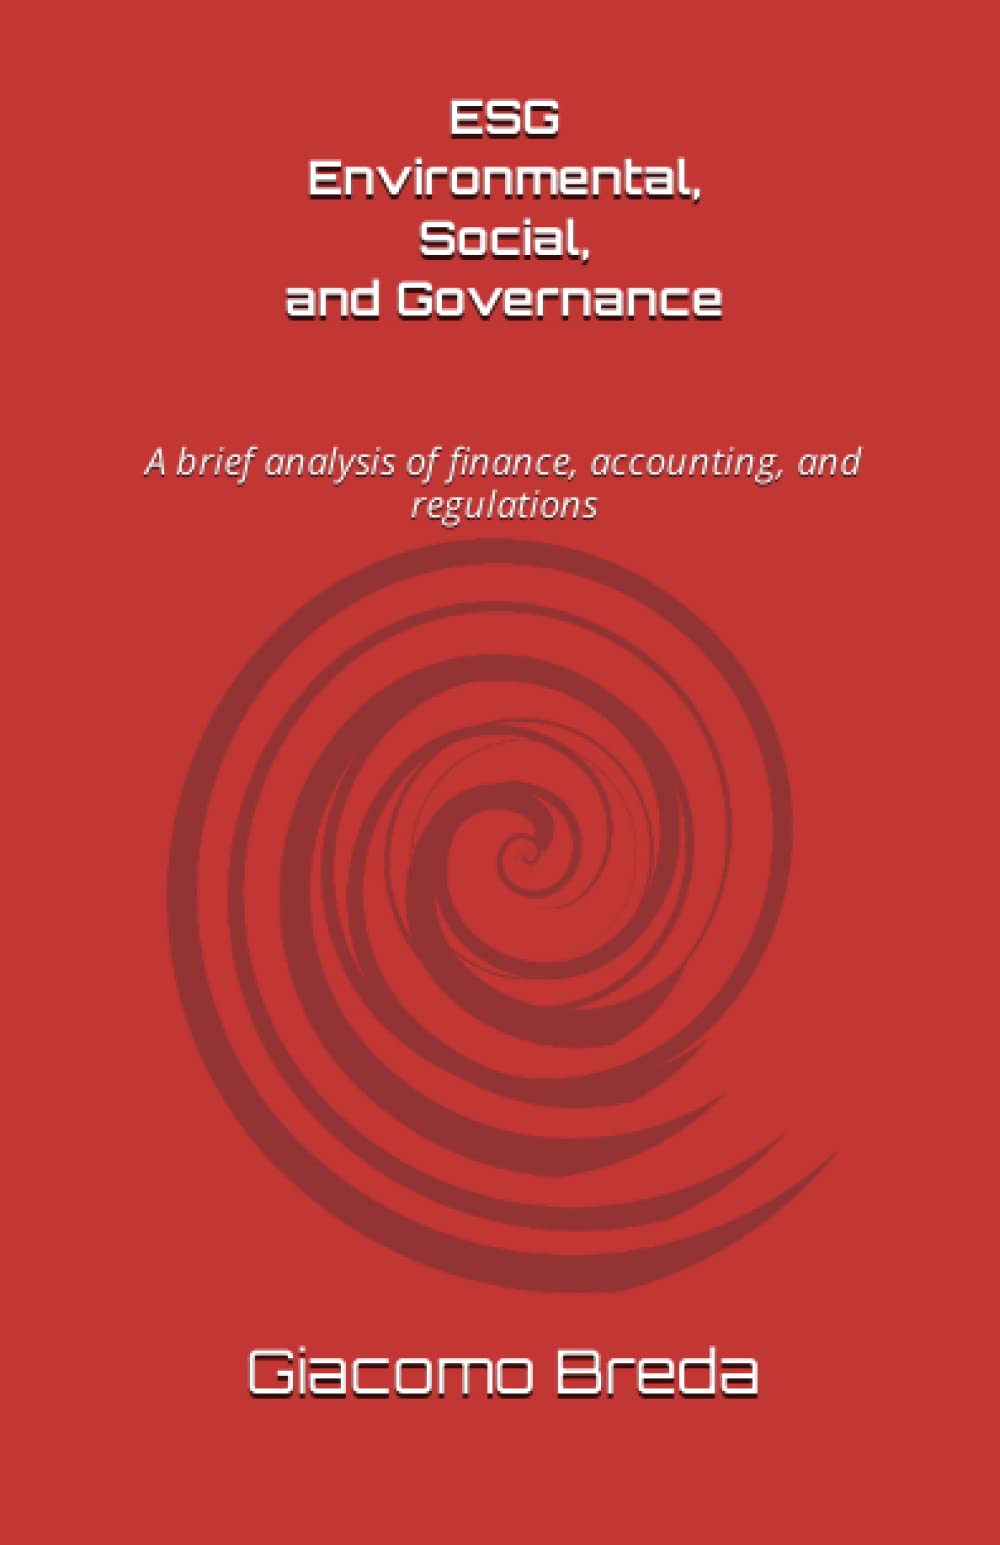 ESG Environmental, Social and Governance: a brief analysis on finance, accounting, and regulations